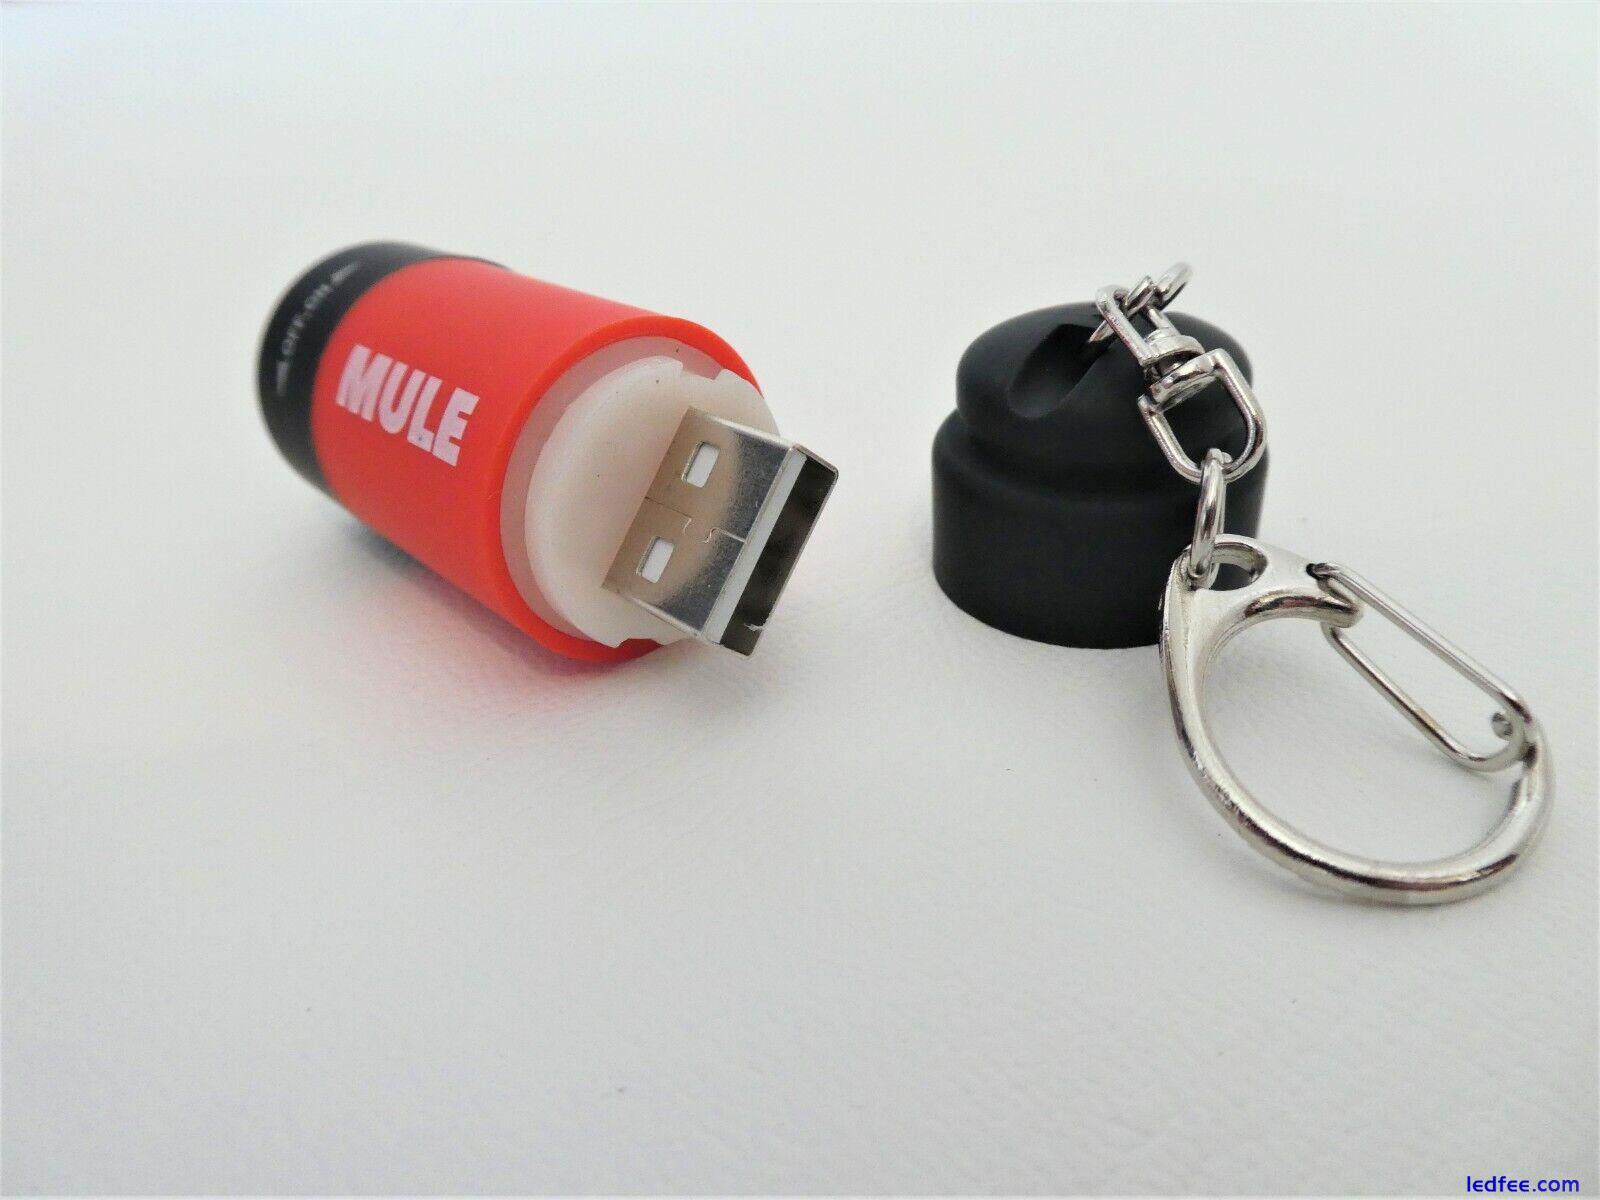 MULE RED USB Rechargeable water resistant inspection torch key-ring EDC 4 